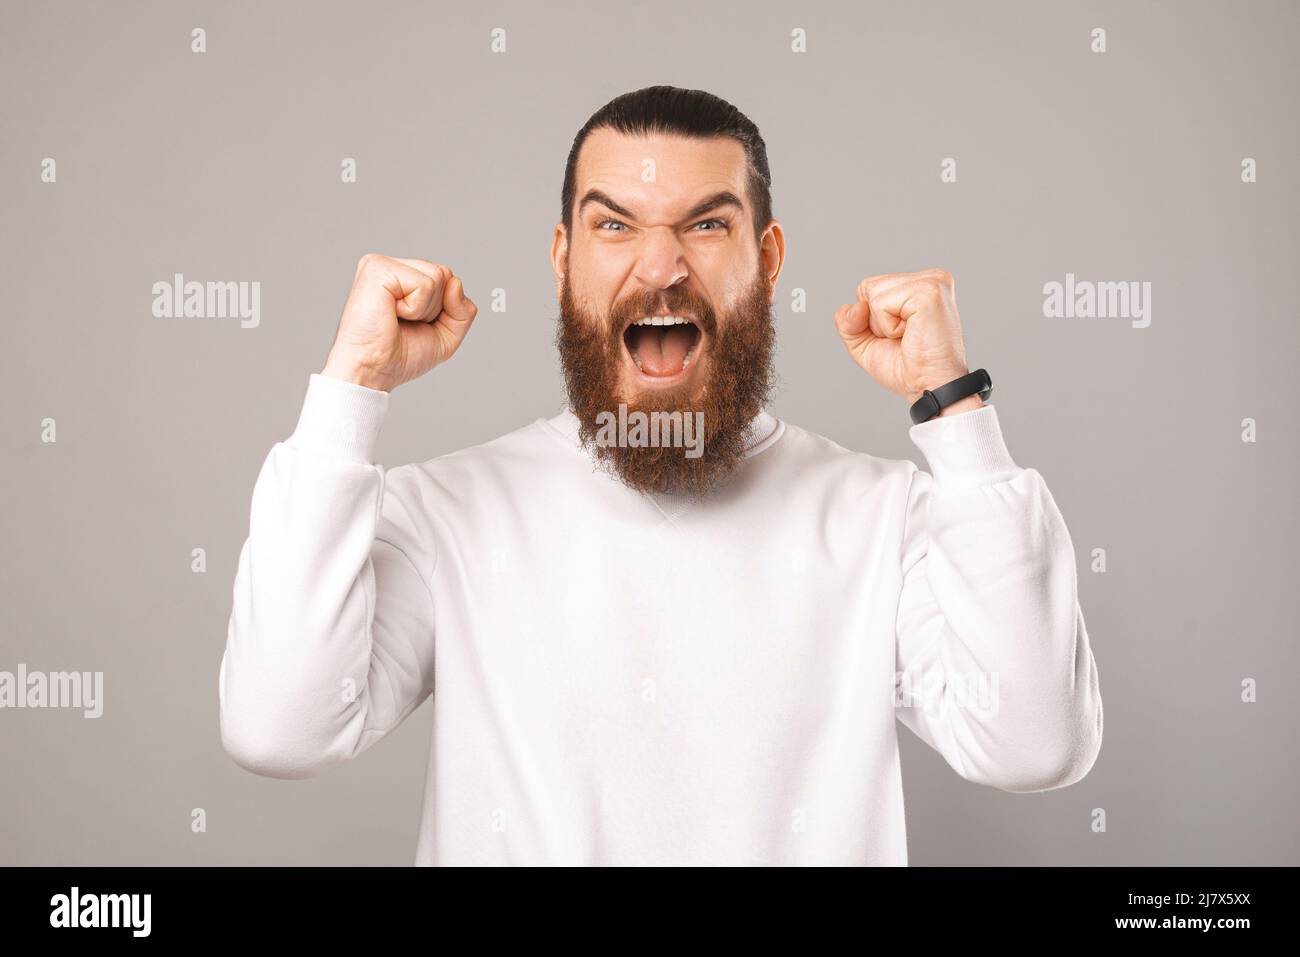 Powerful bearded man is screaming and making the winner gesture. Sudio shot over grey backdrop. Stock Photo